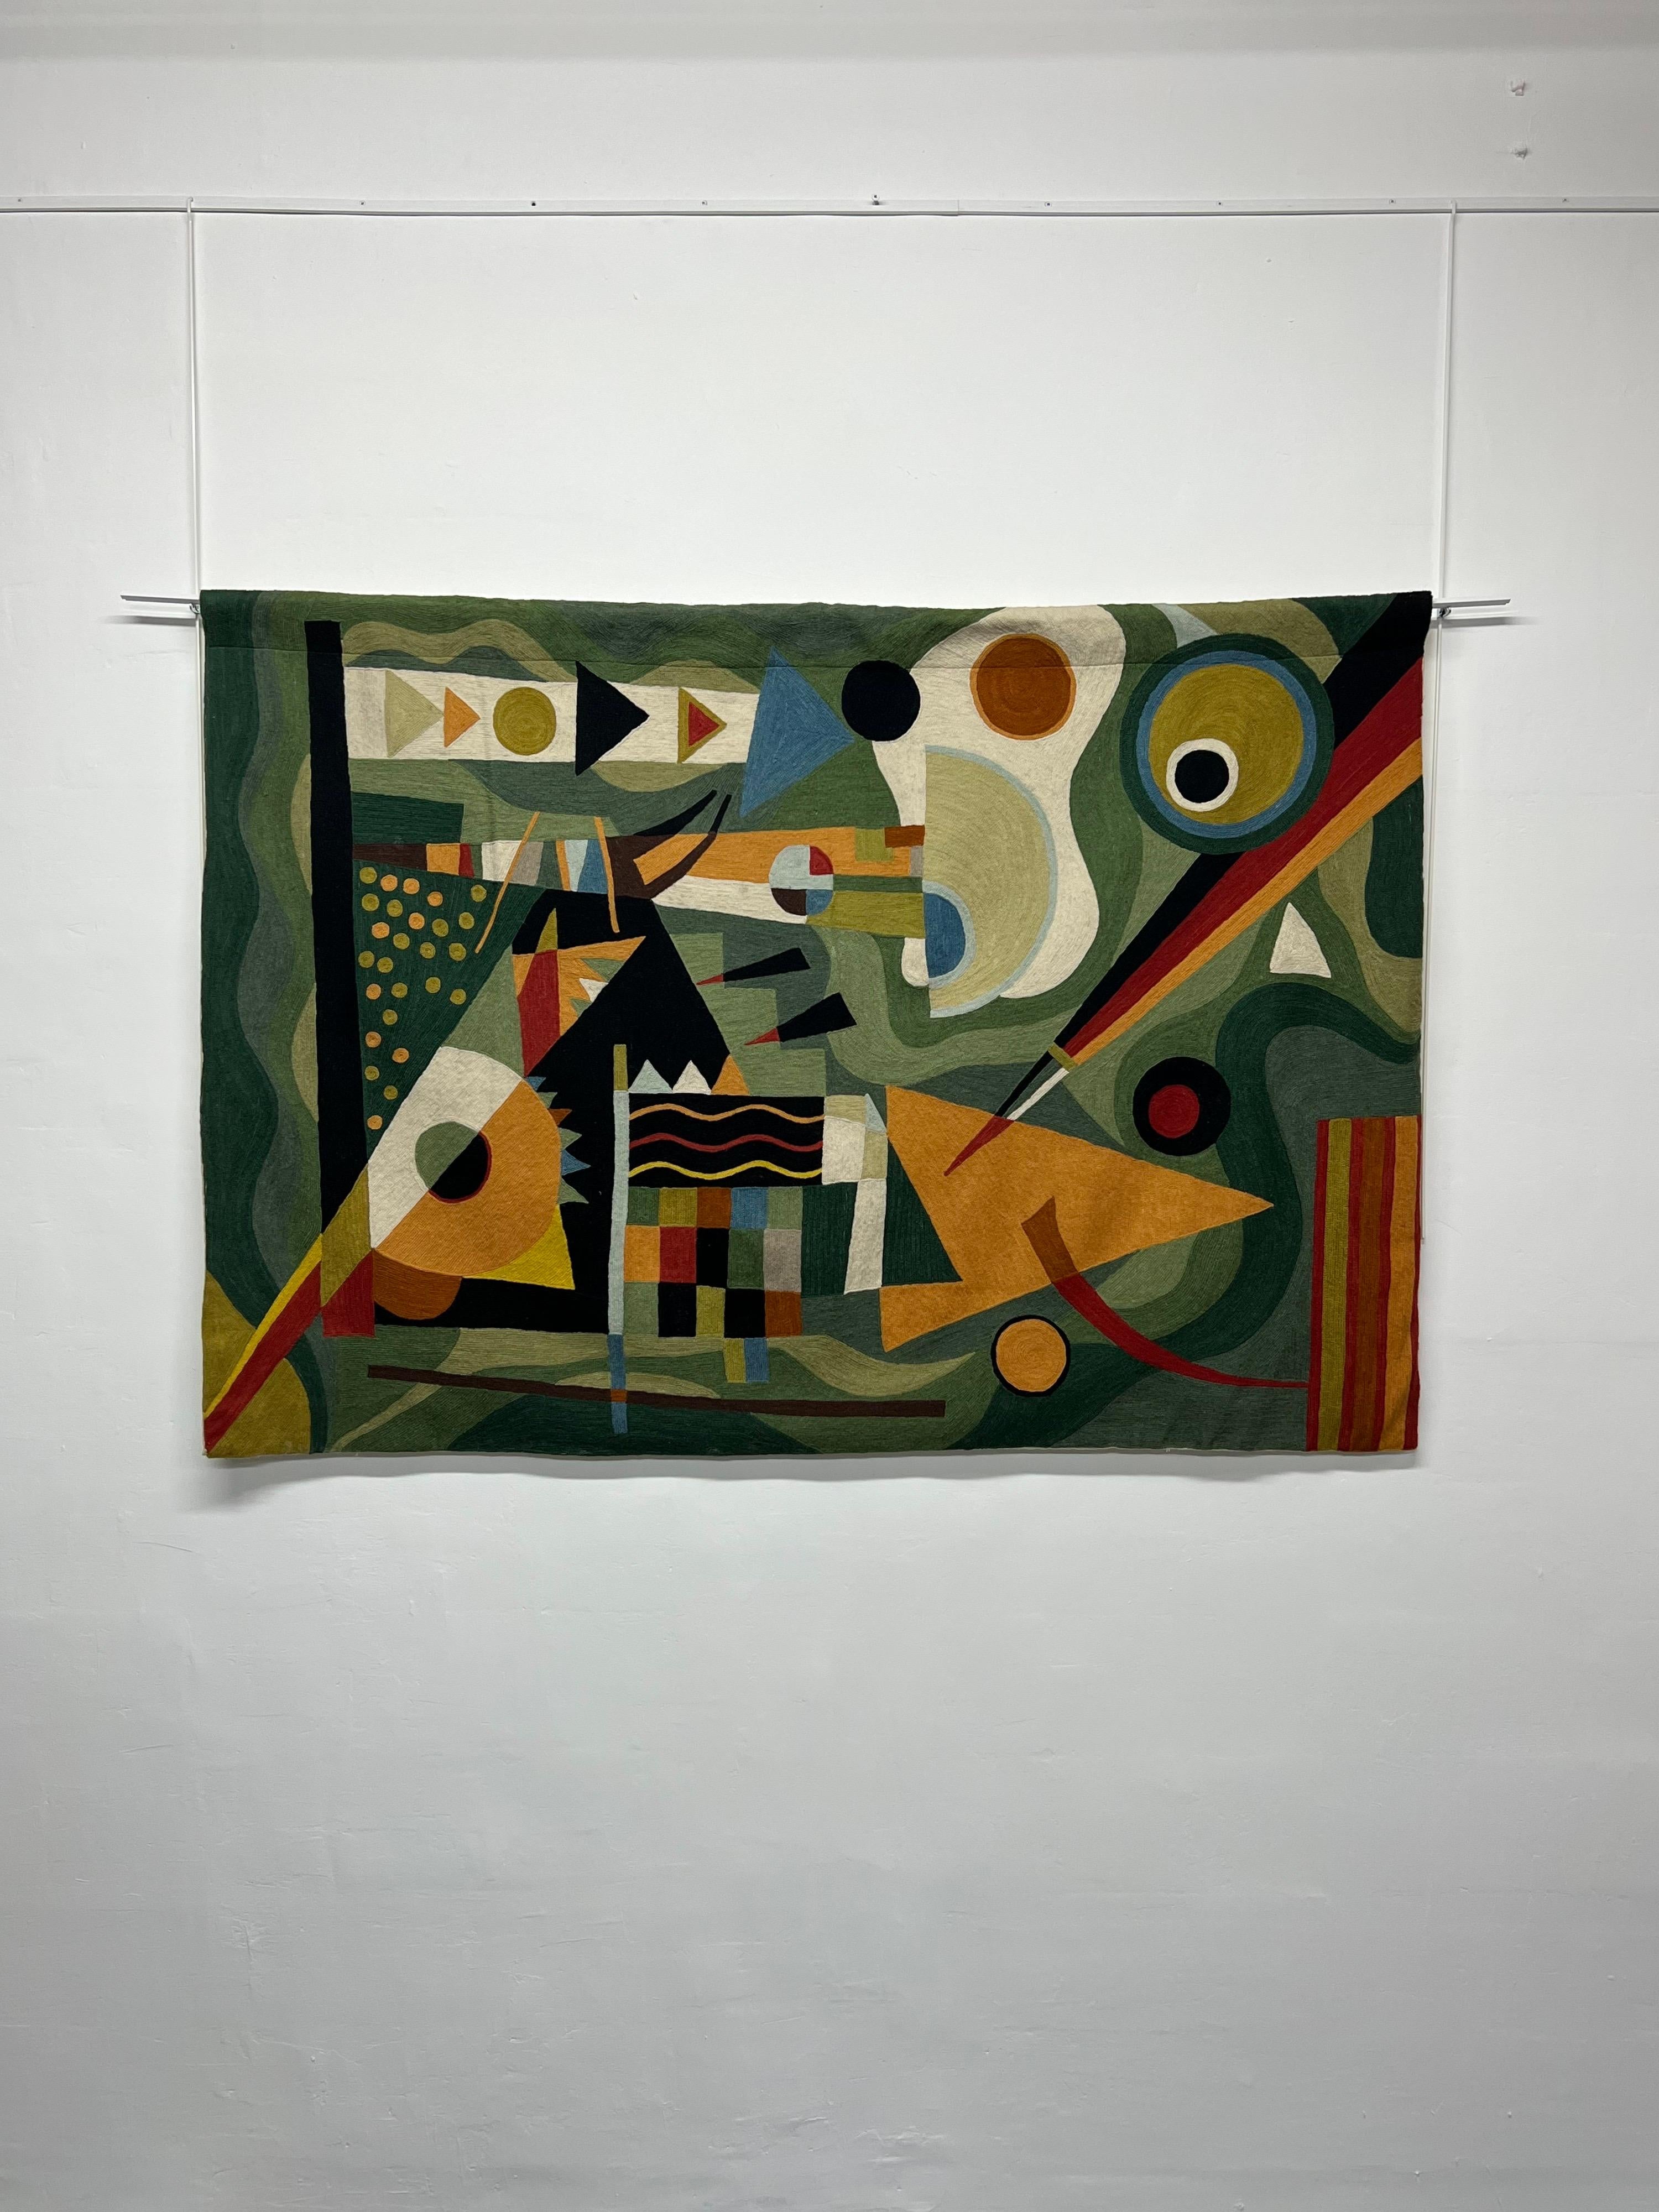 Modern, geometric wool wall tapestry or rug hand embroidered using fine wool and inspired by the artist Kandinsky. Use as a wall tapestry with your own dowel rod hardware or lay flat on the floor to use as a rug. The backing is cotton canvas and a